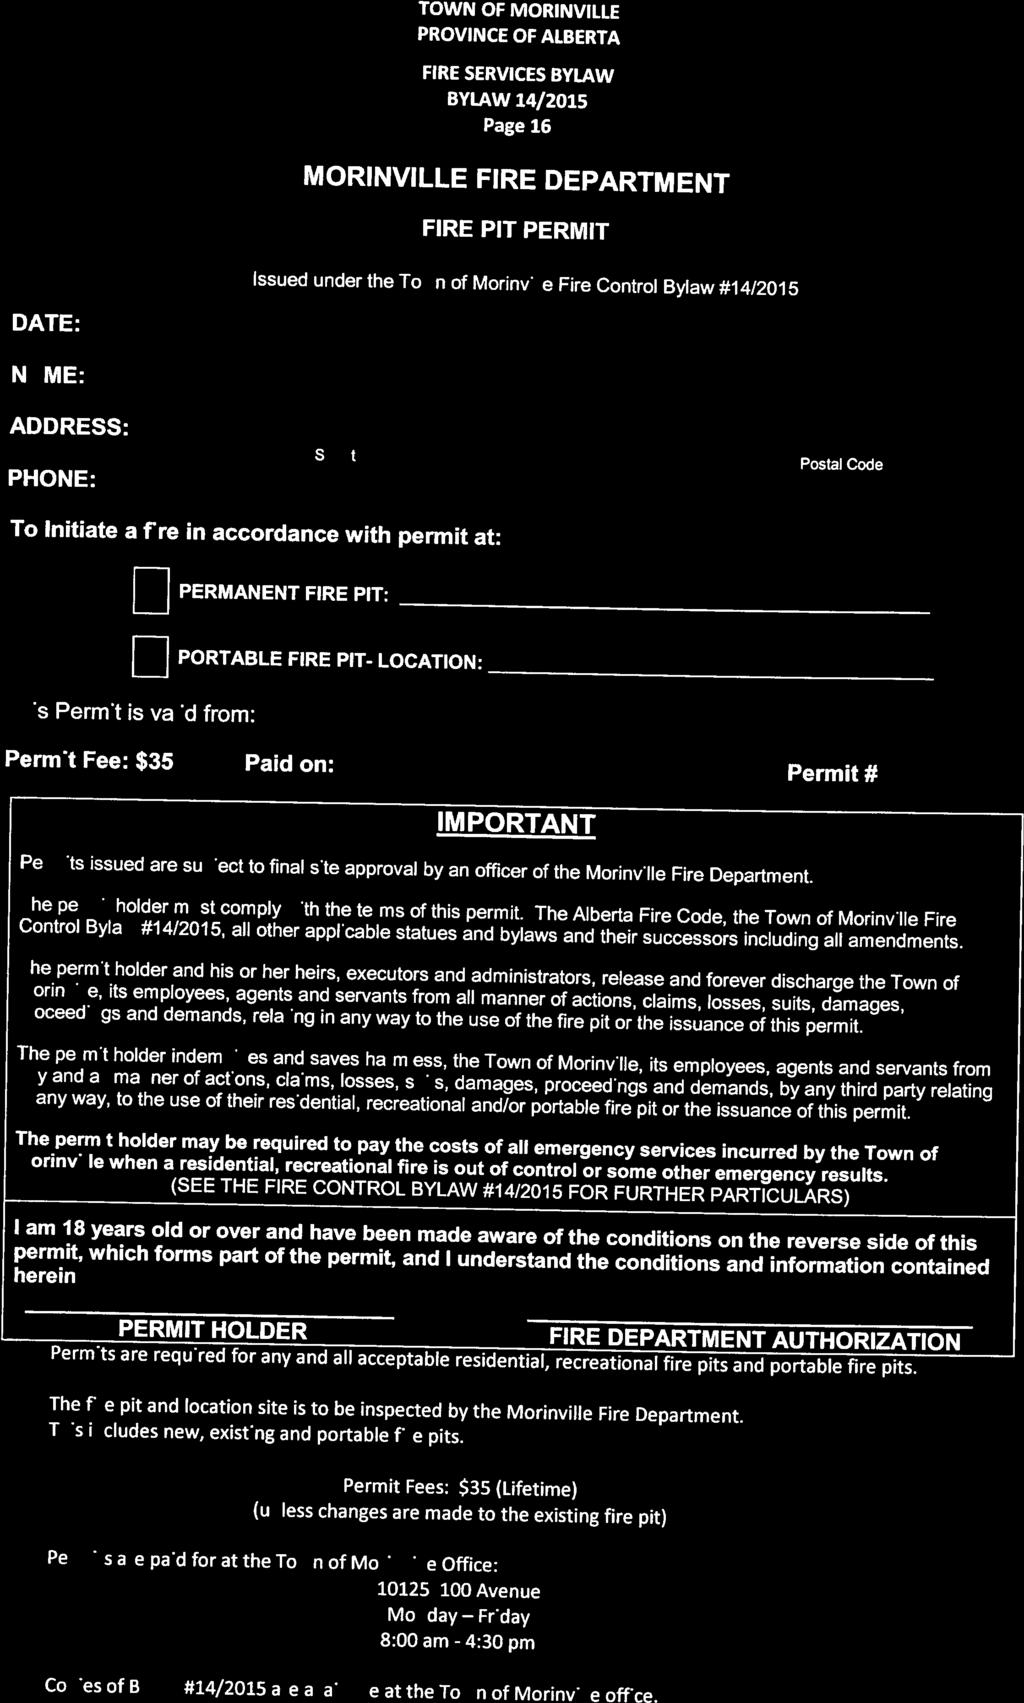 . TOWN OF MORINVILLE r,morinville Page 16 MORINVILLE FIRE DEPARTMENT H FIRE PIT PERMIT Issued under the Town of Morinville Fire Control Bylaw #14/215 DATE: NAME: ADDRESS: PHONE: Street Postal Code To